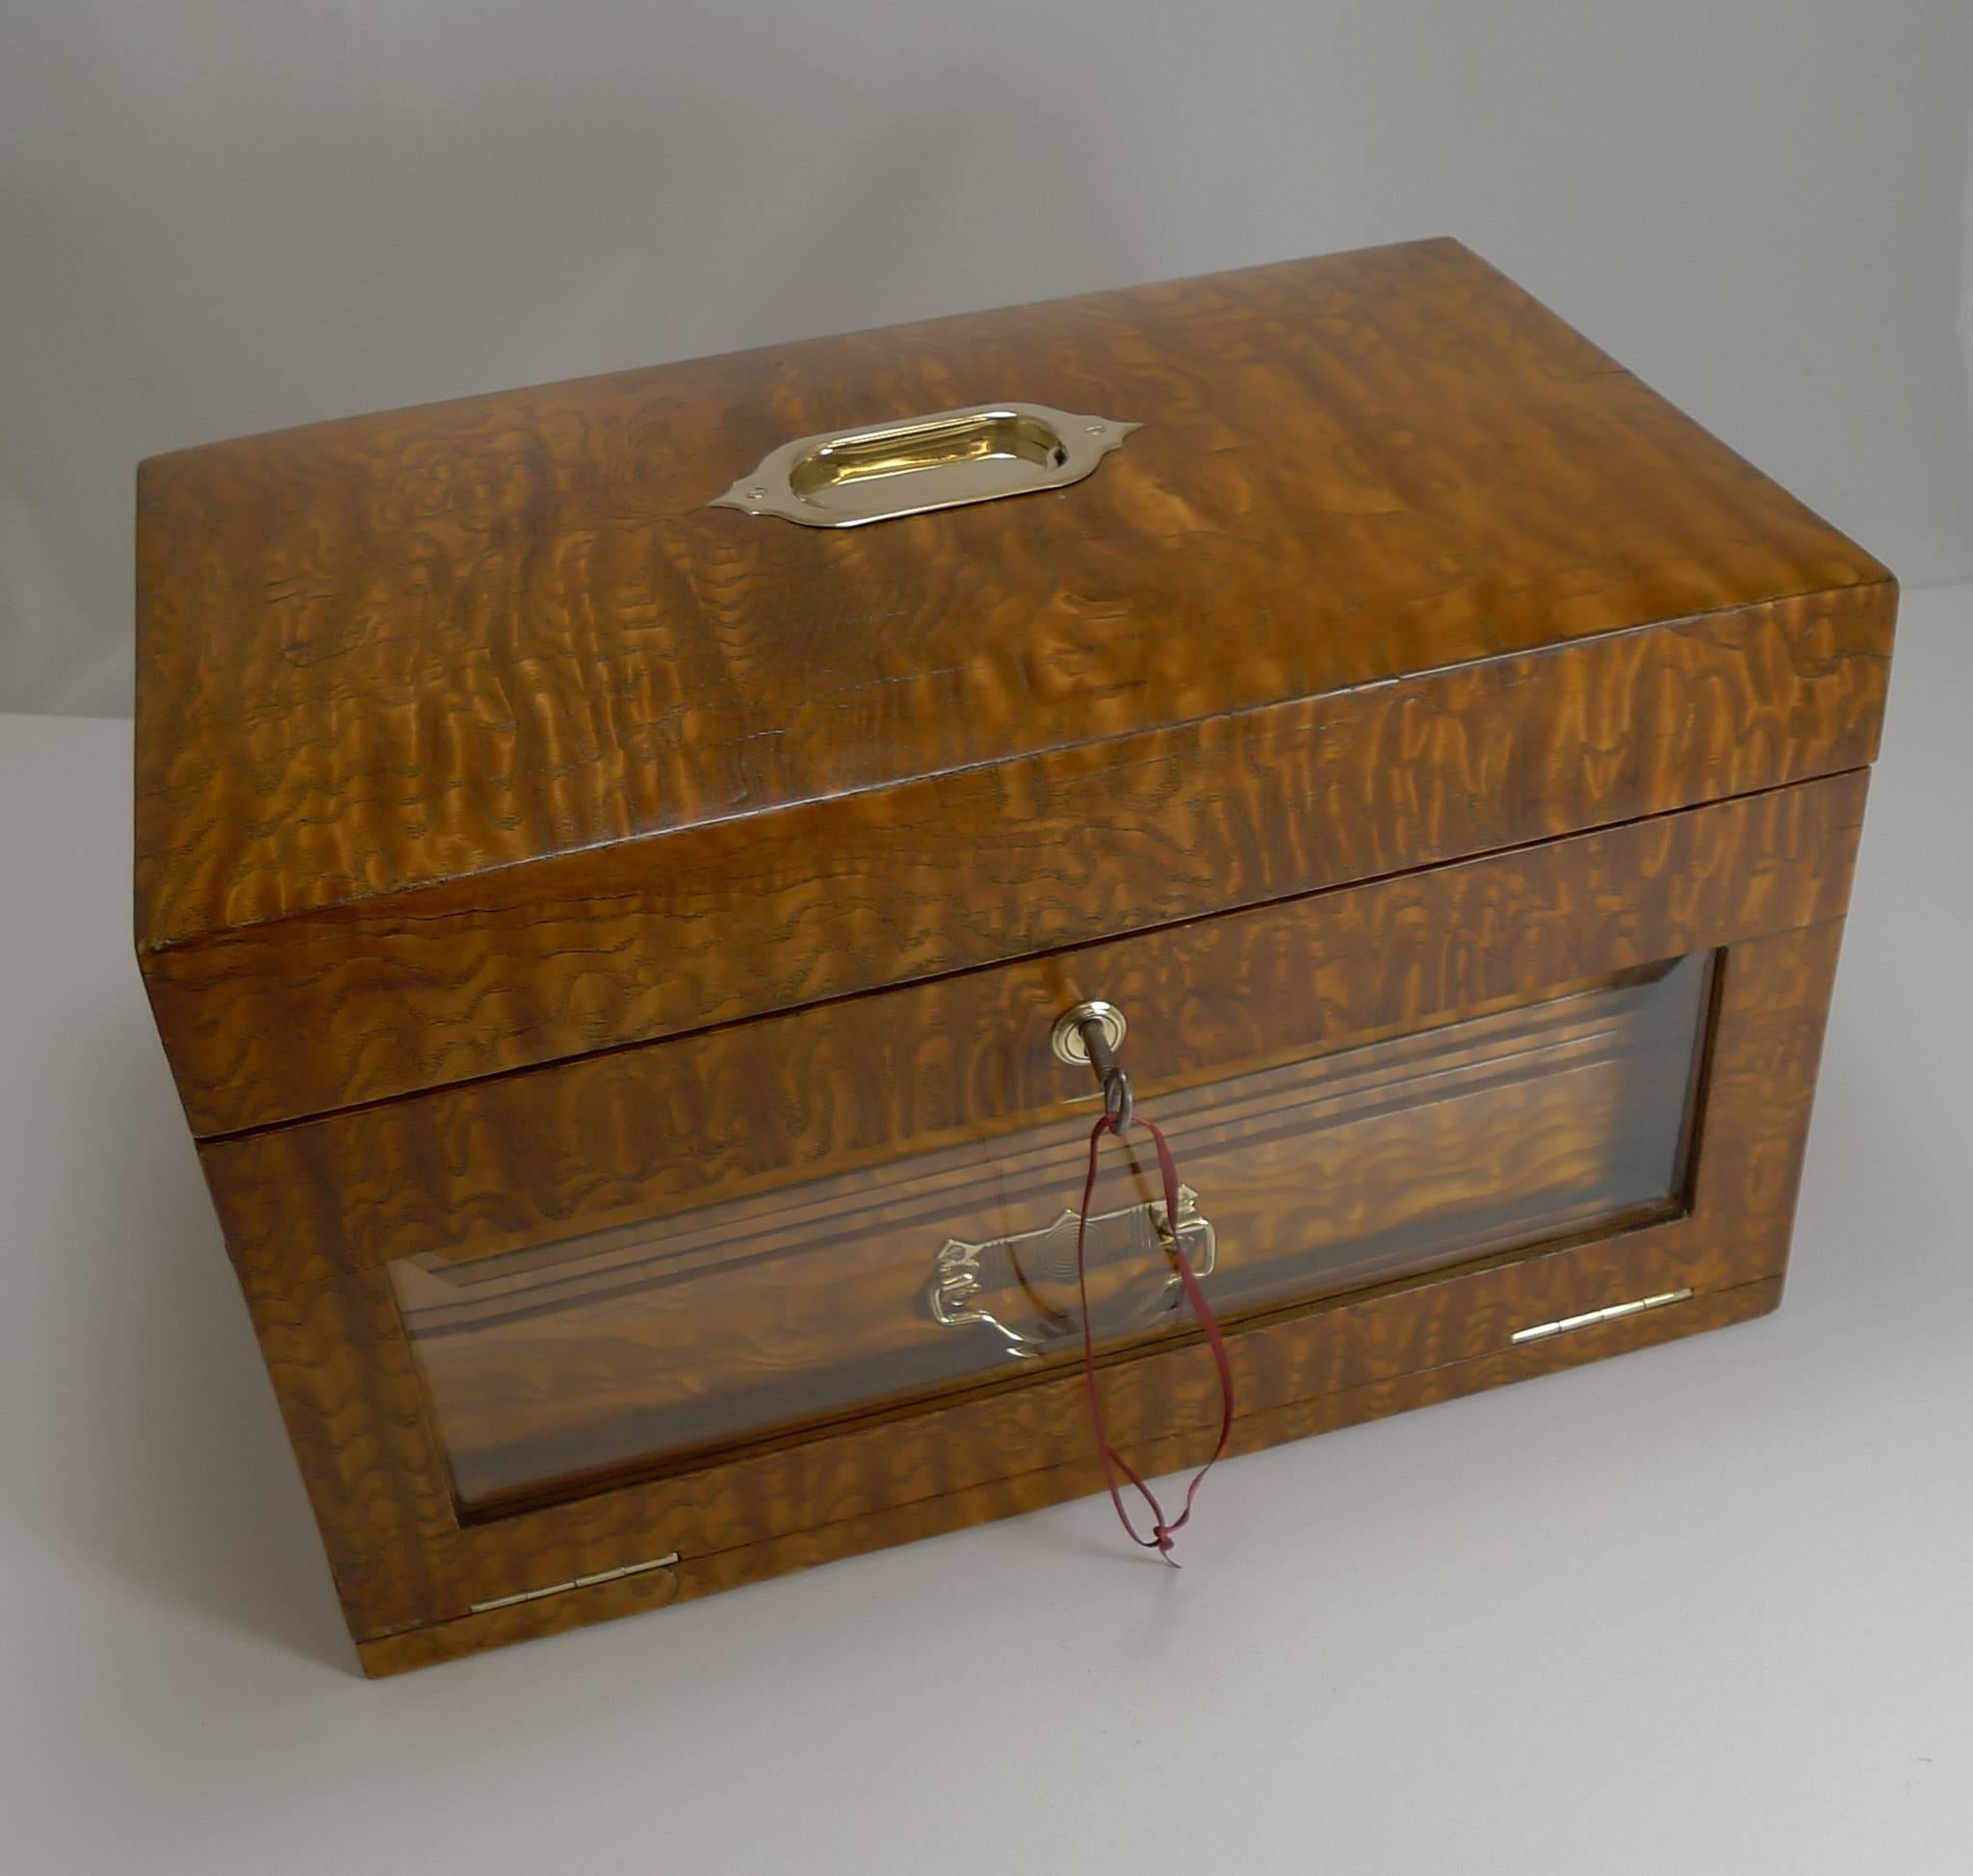 A beautiful late Victorian jewellery box and a grand, very usable size.

Made from one of my favourite timbers, Burr Ash with it's golden wavy figuring. The top is inset with a flush polished brass handle. The front has a mounted brass escutcheon